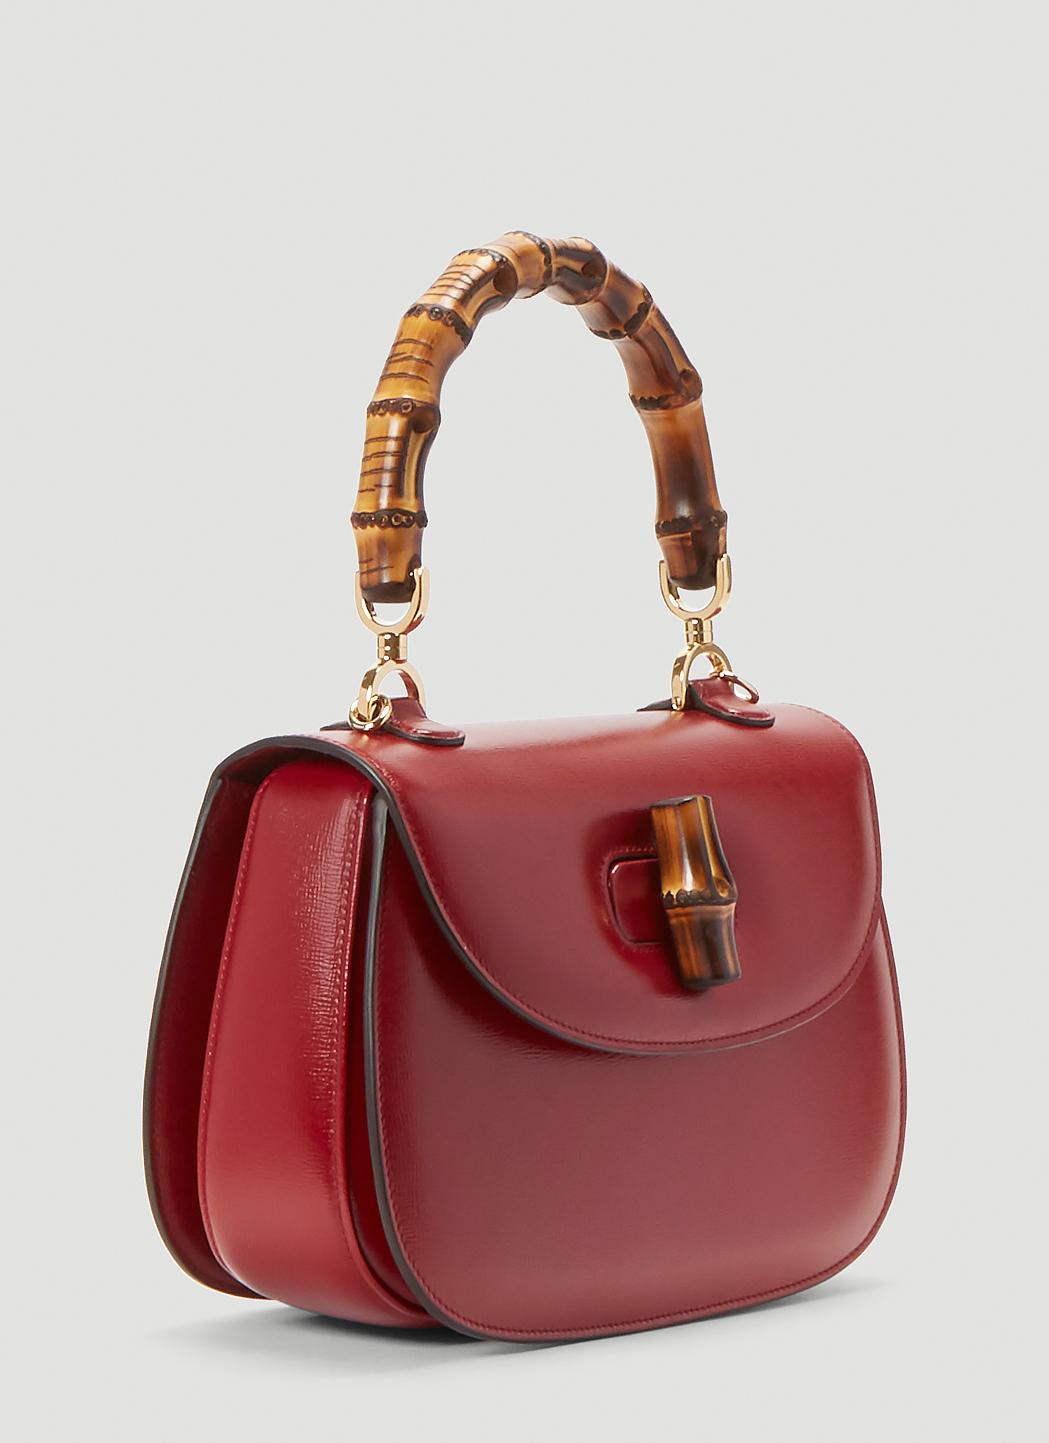 Gucci Bamboo 1947 mini bag in red leather